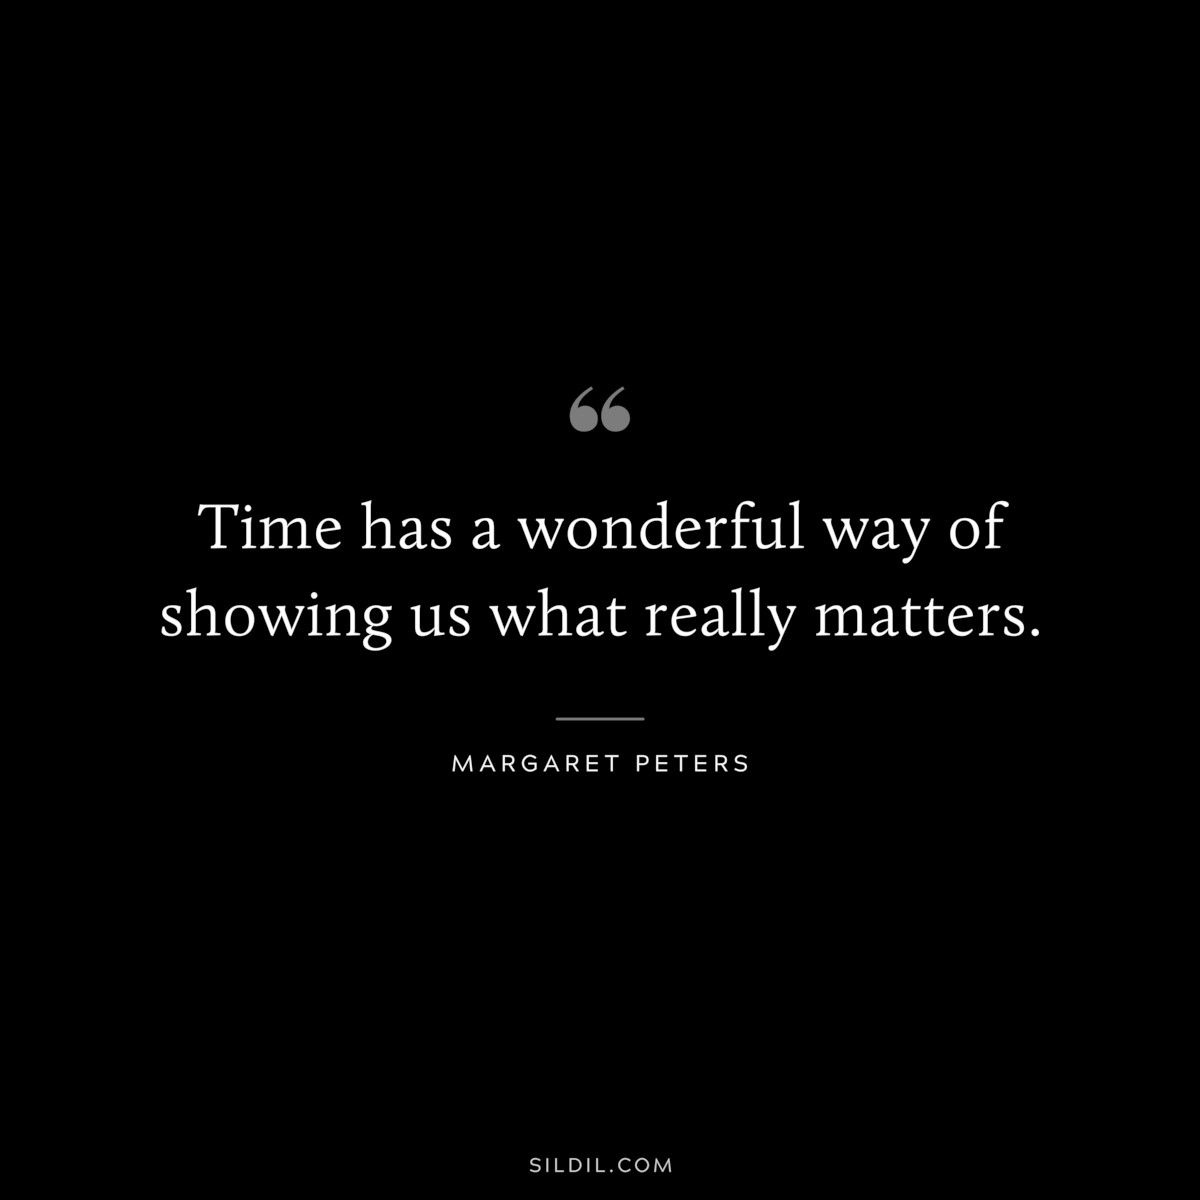 Time has a wonderful way of showing us what really matters. ― Margaret Peters